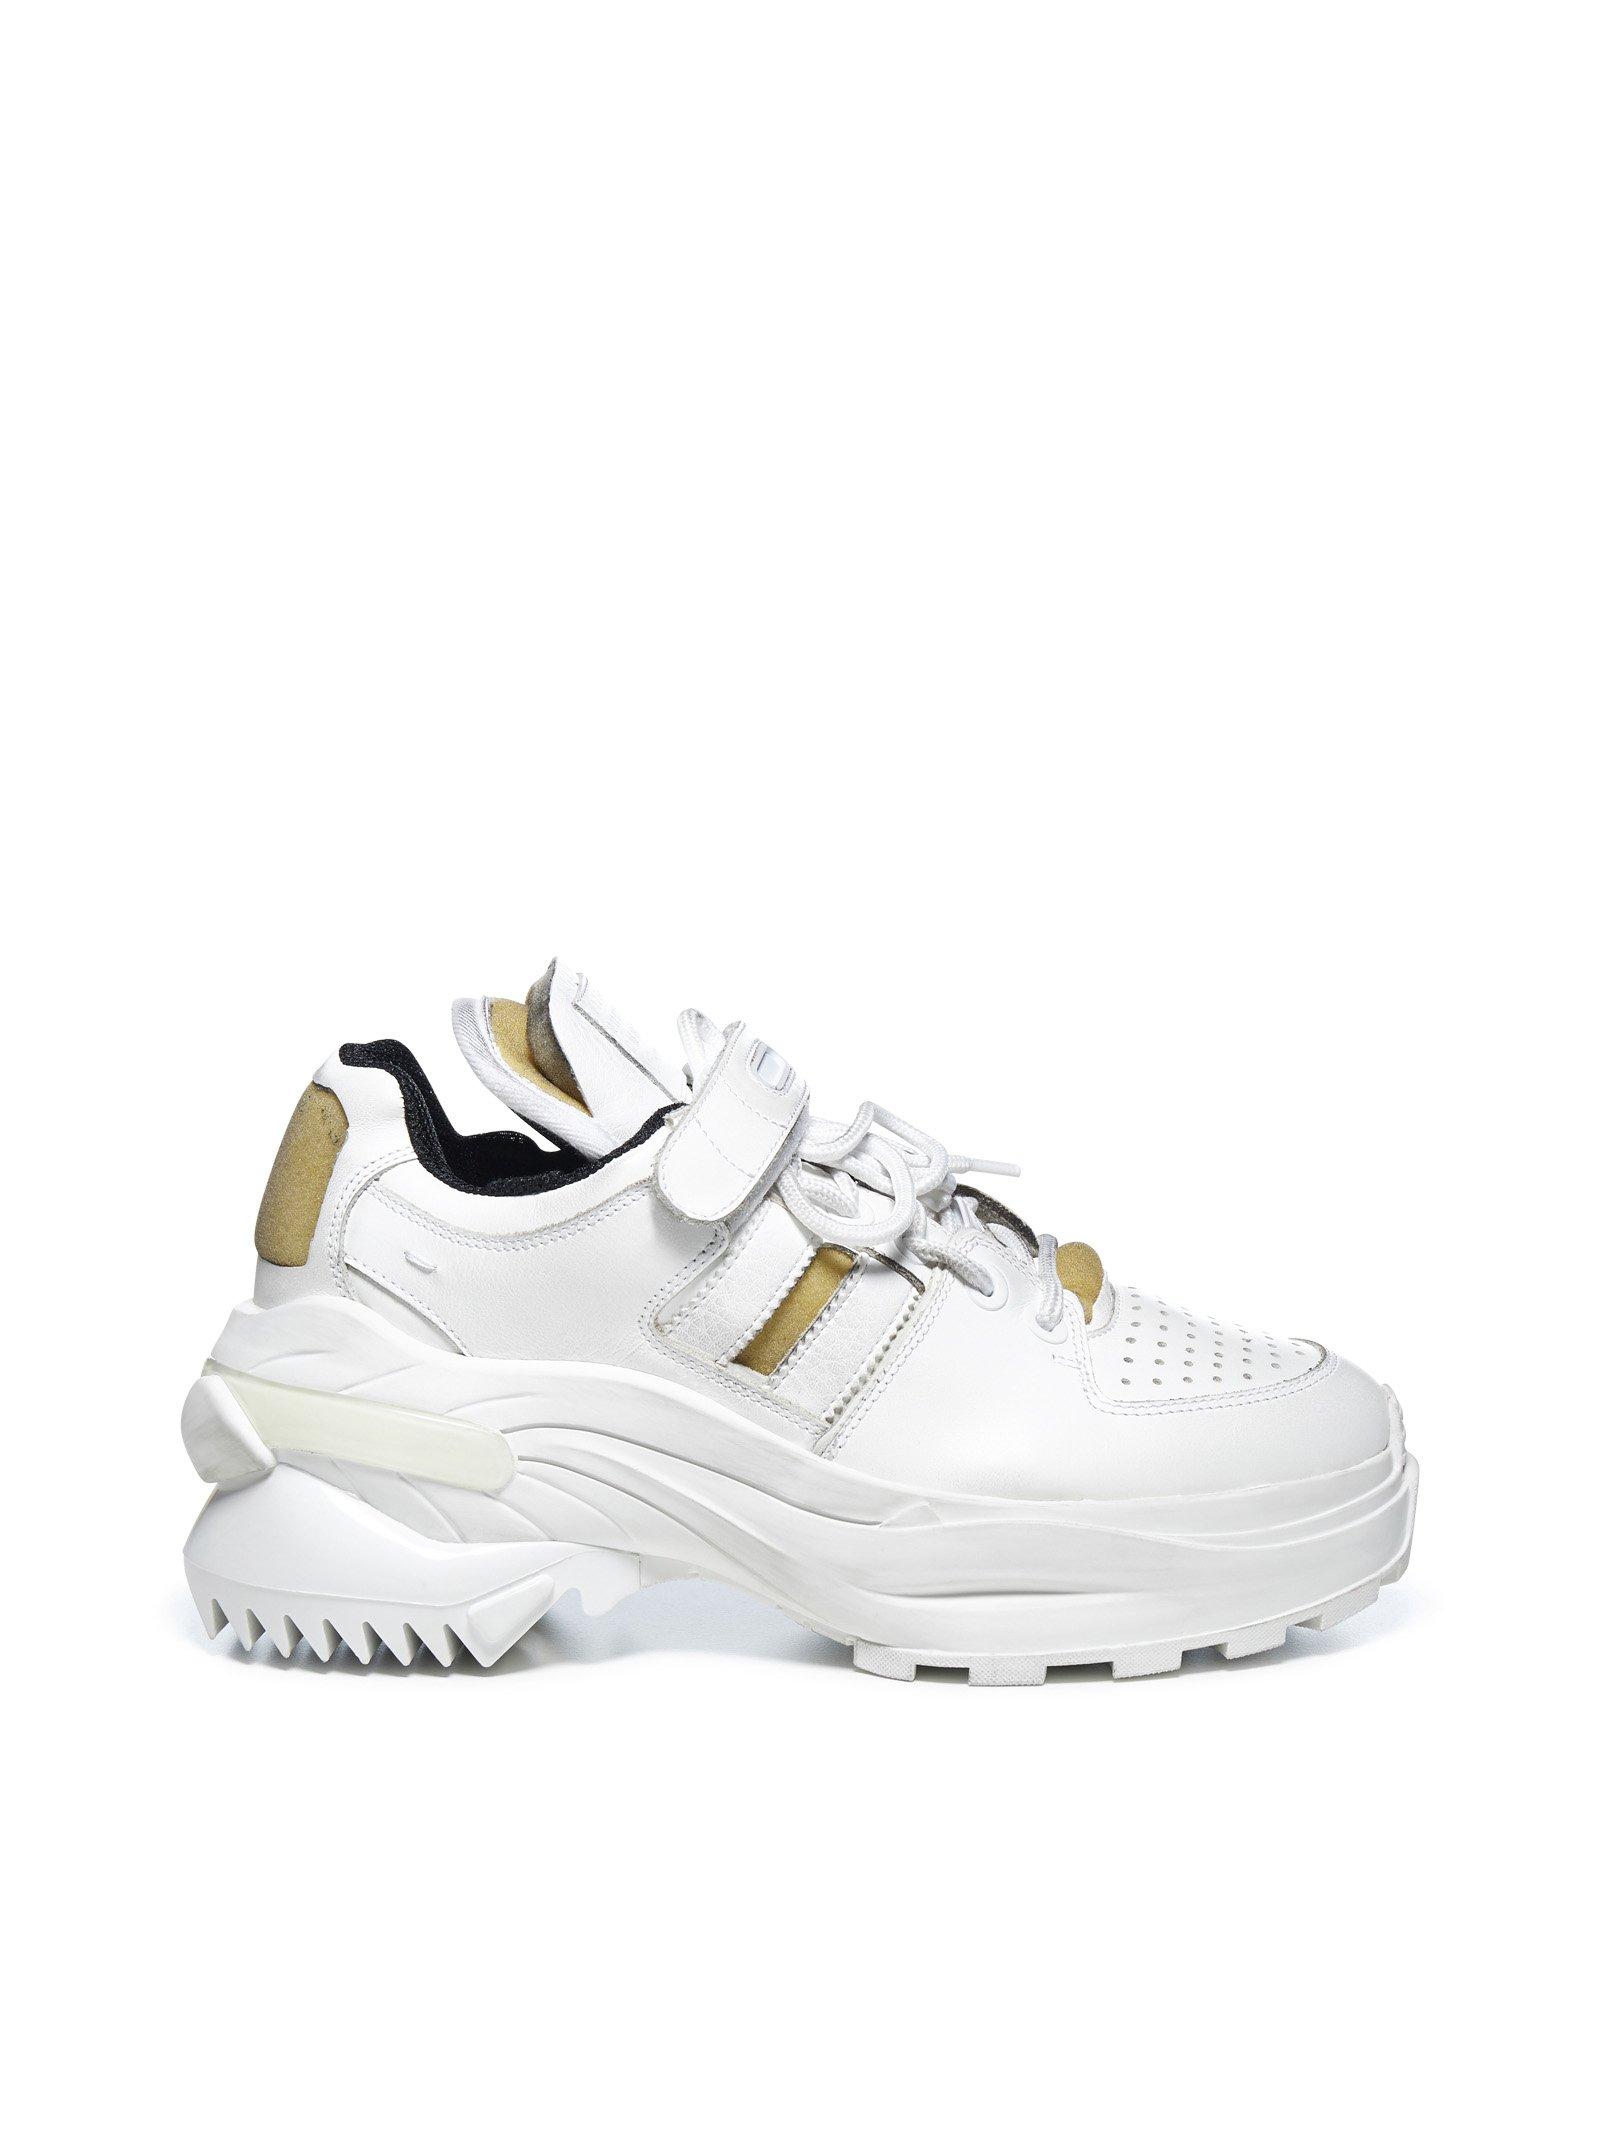 Maison Margiela Retro Fit Leather Sneakers in White | Lyst